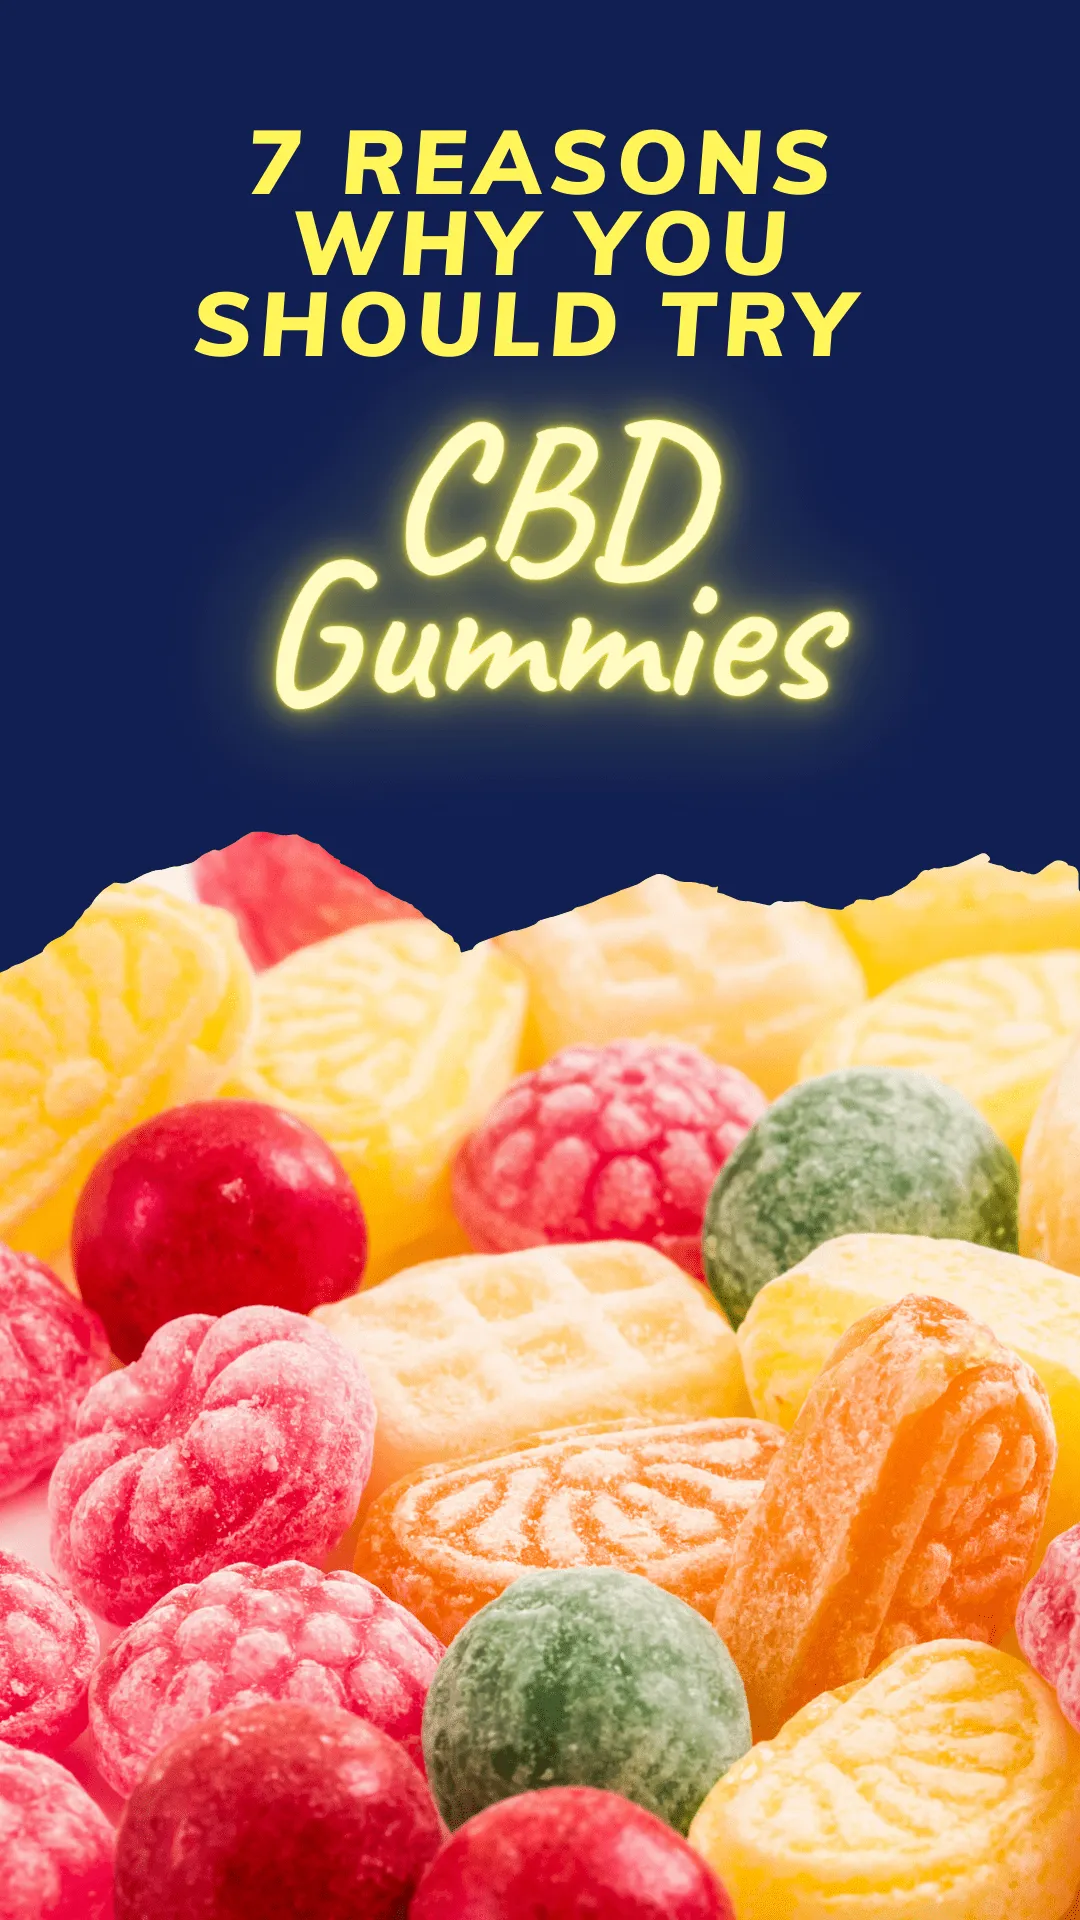 7 Reasons to try CBD Gummies once